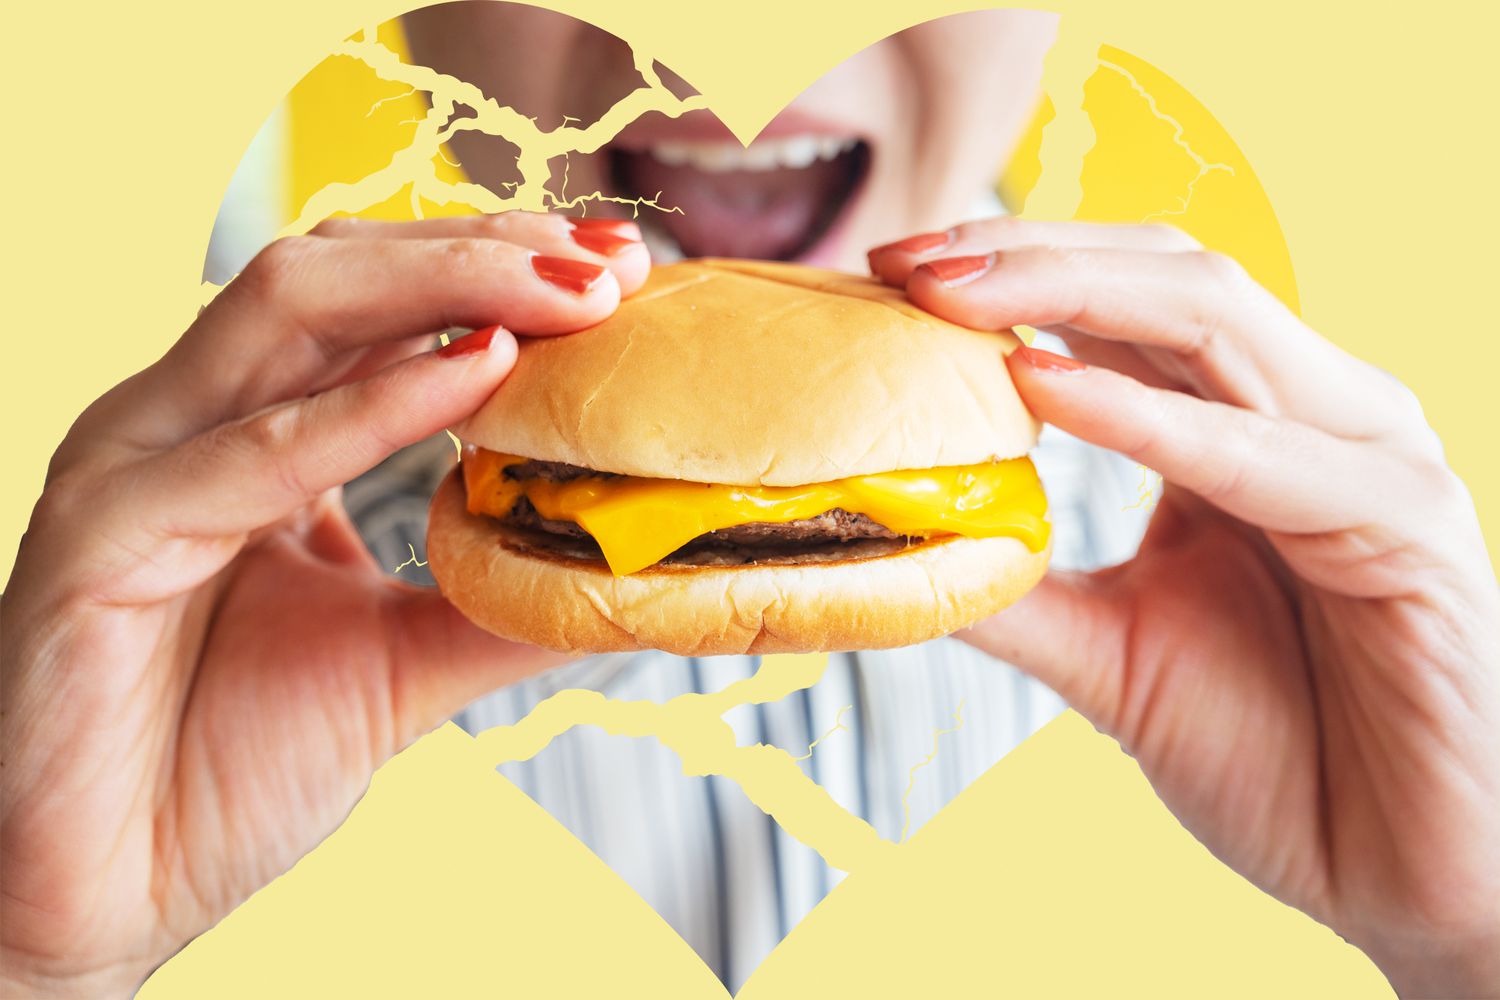 Hands holding a cheeseburger in front of a cracked heart with a persons open mouth in it